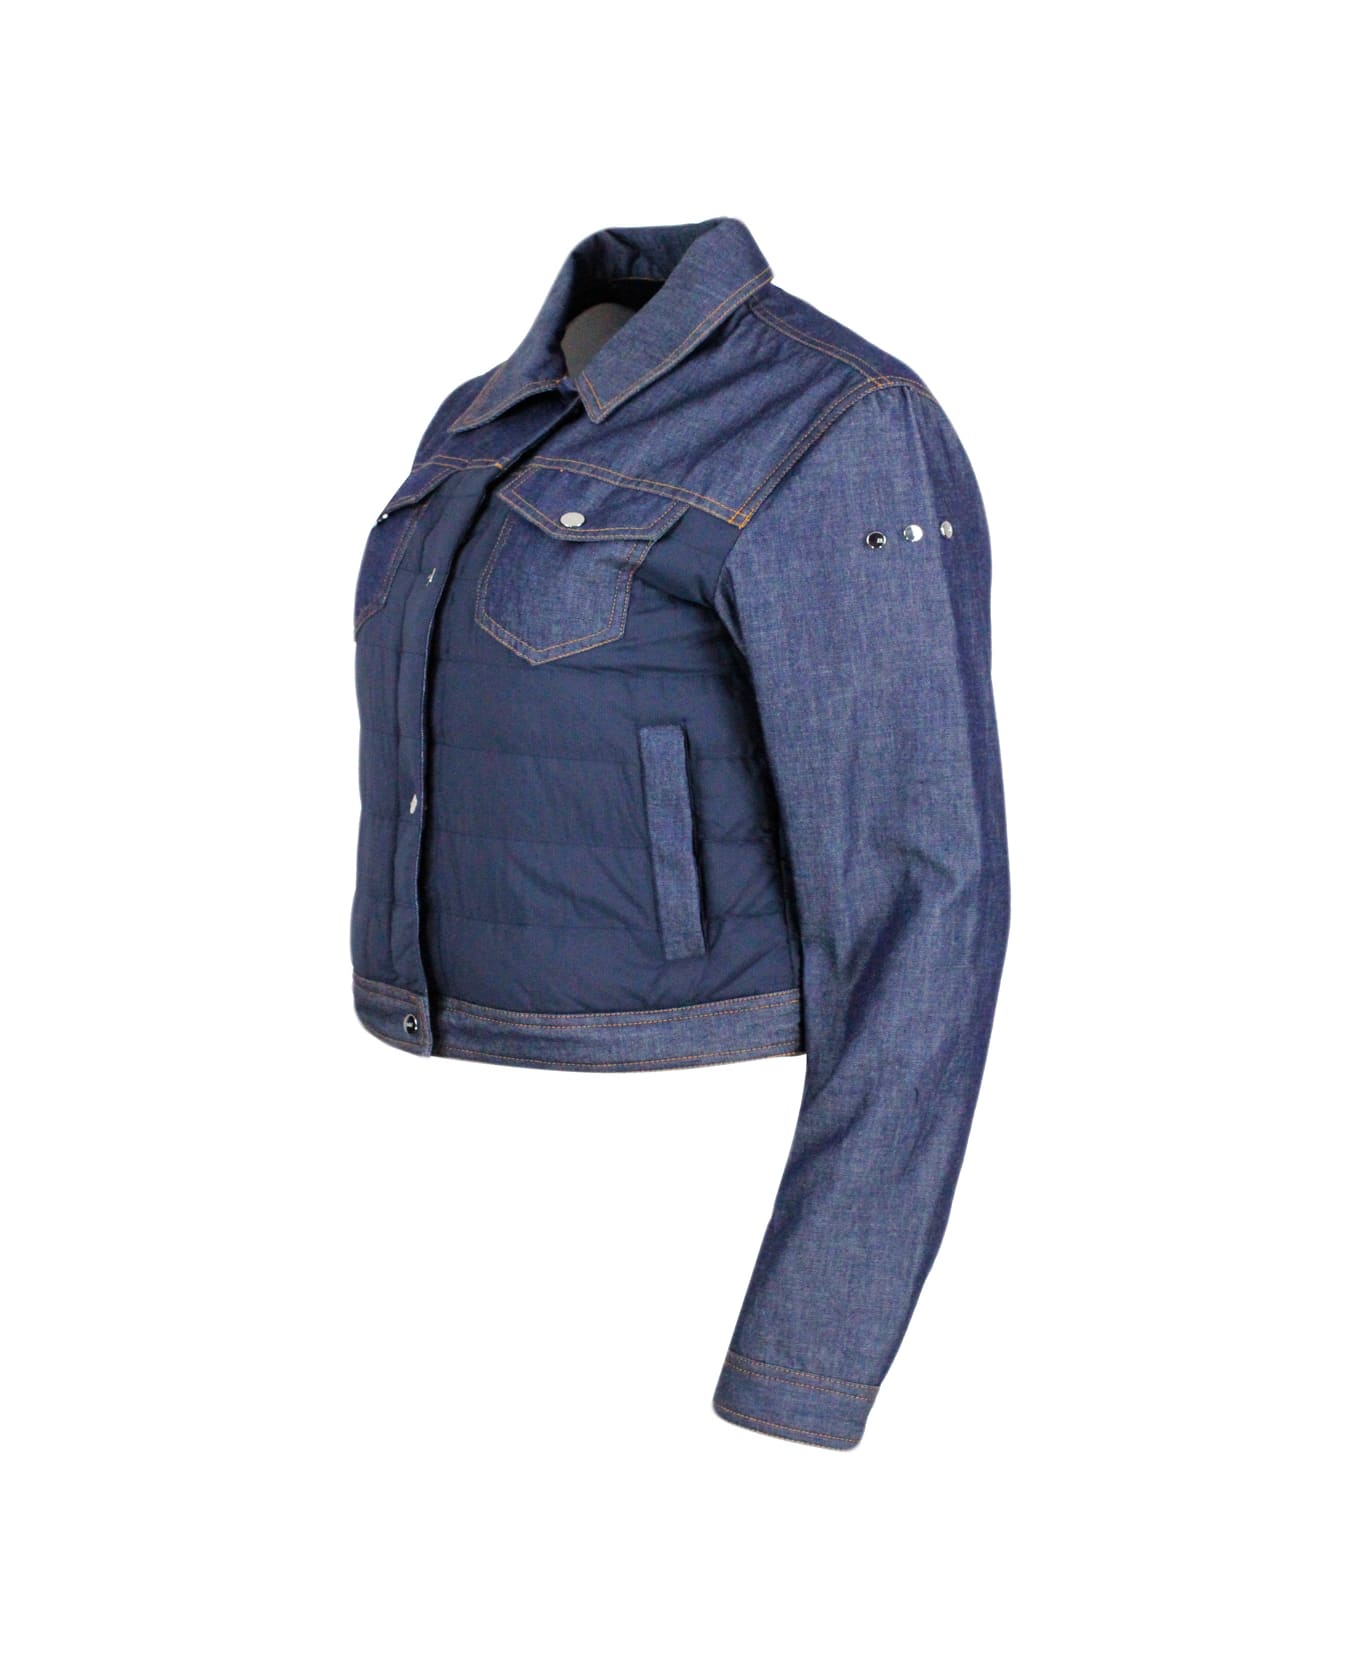 Add Jacket In Soft Denim With Lightly Padded Technical Fabric Parts And Zip Closure. - Denim